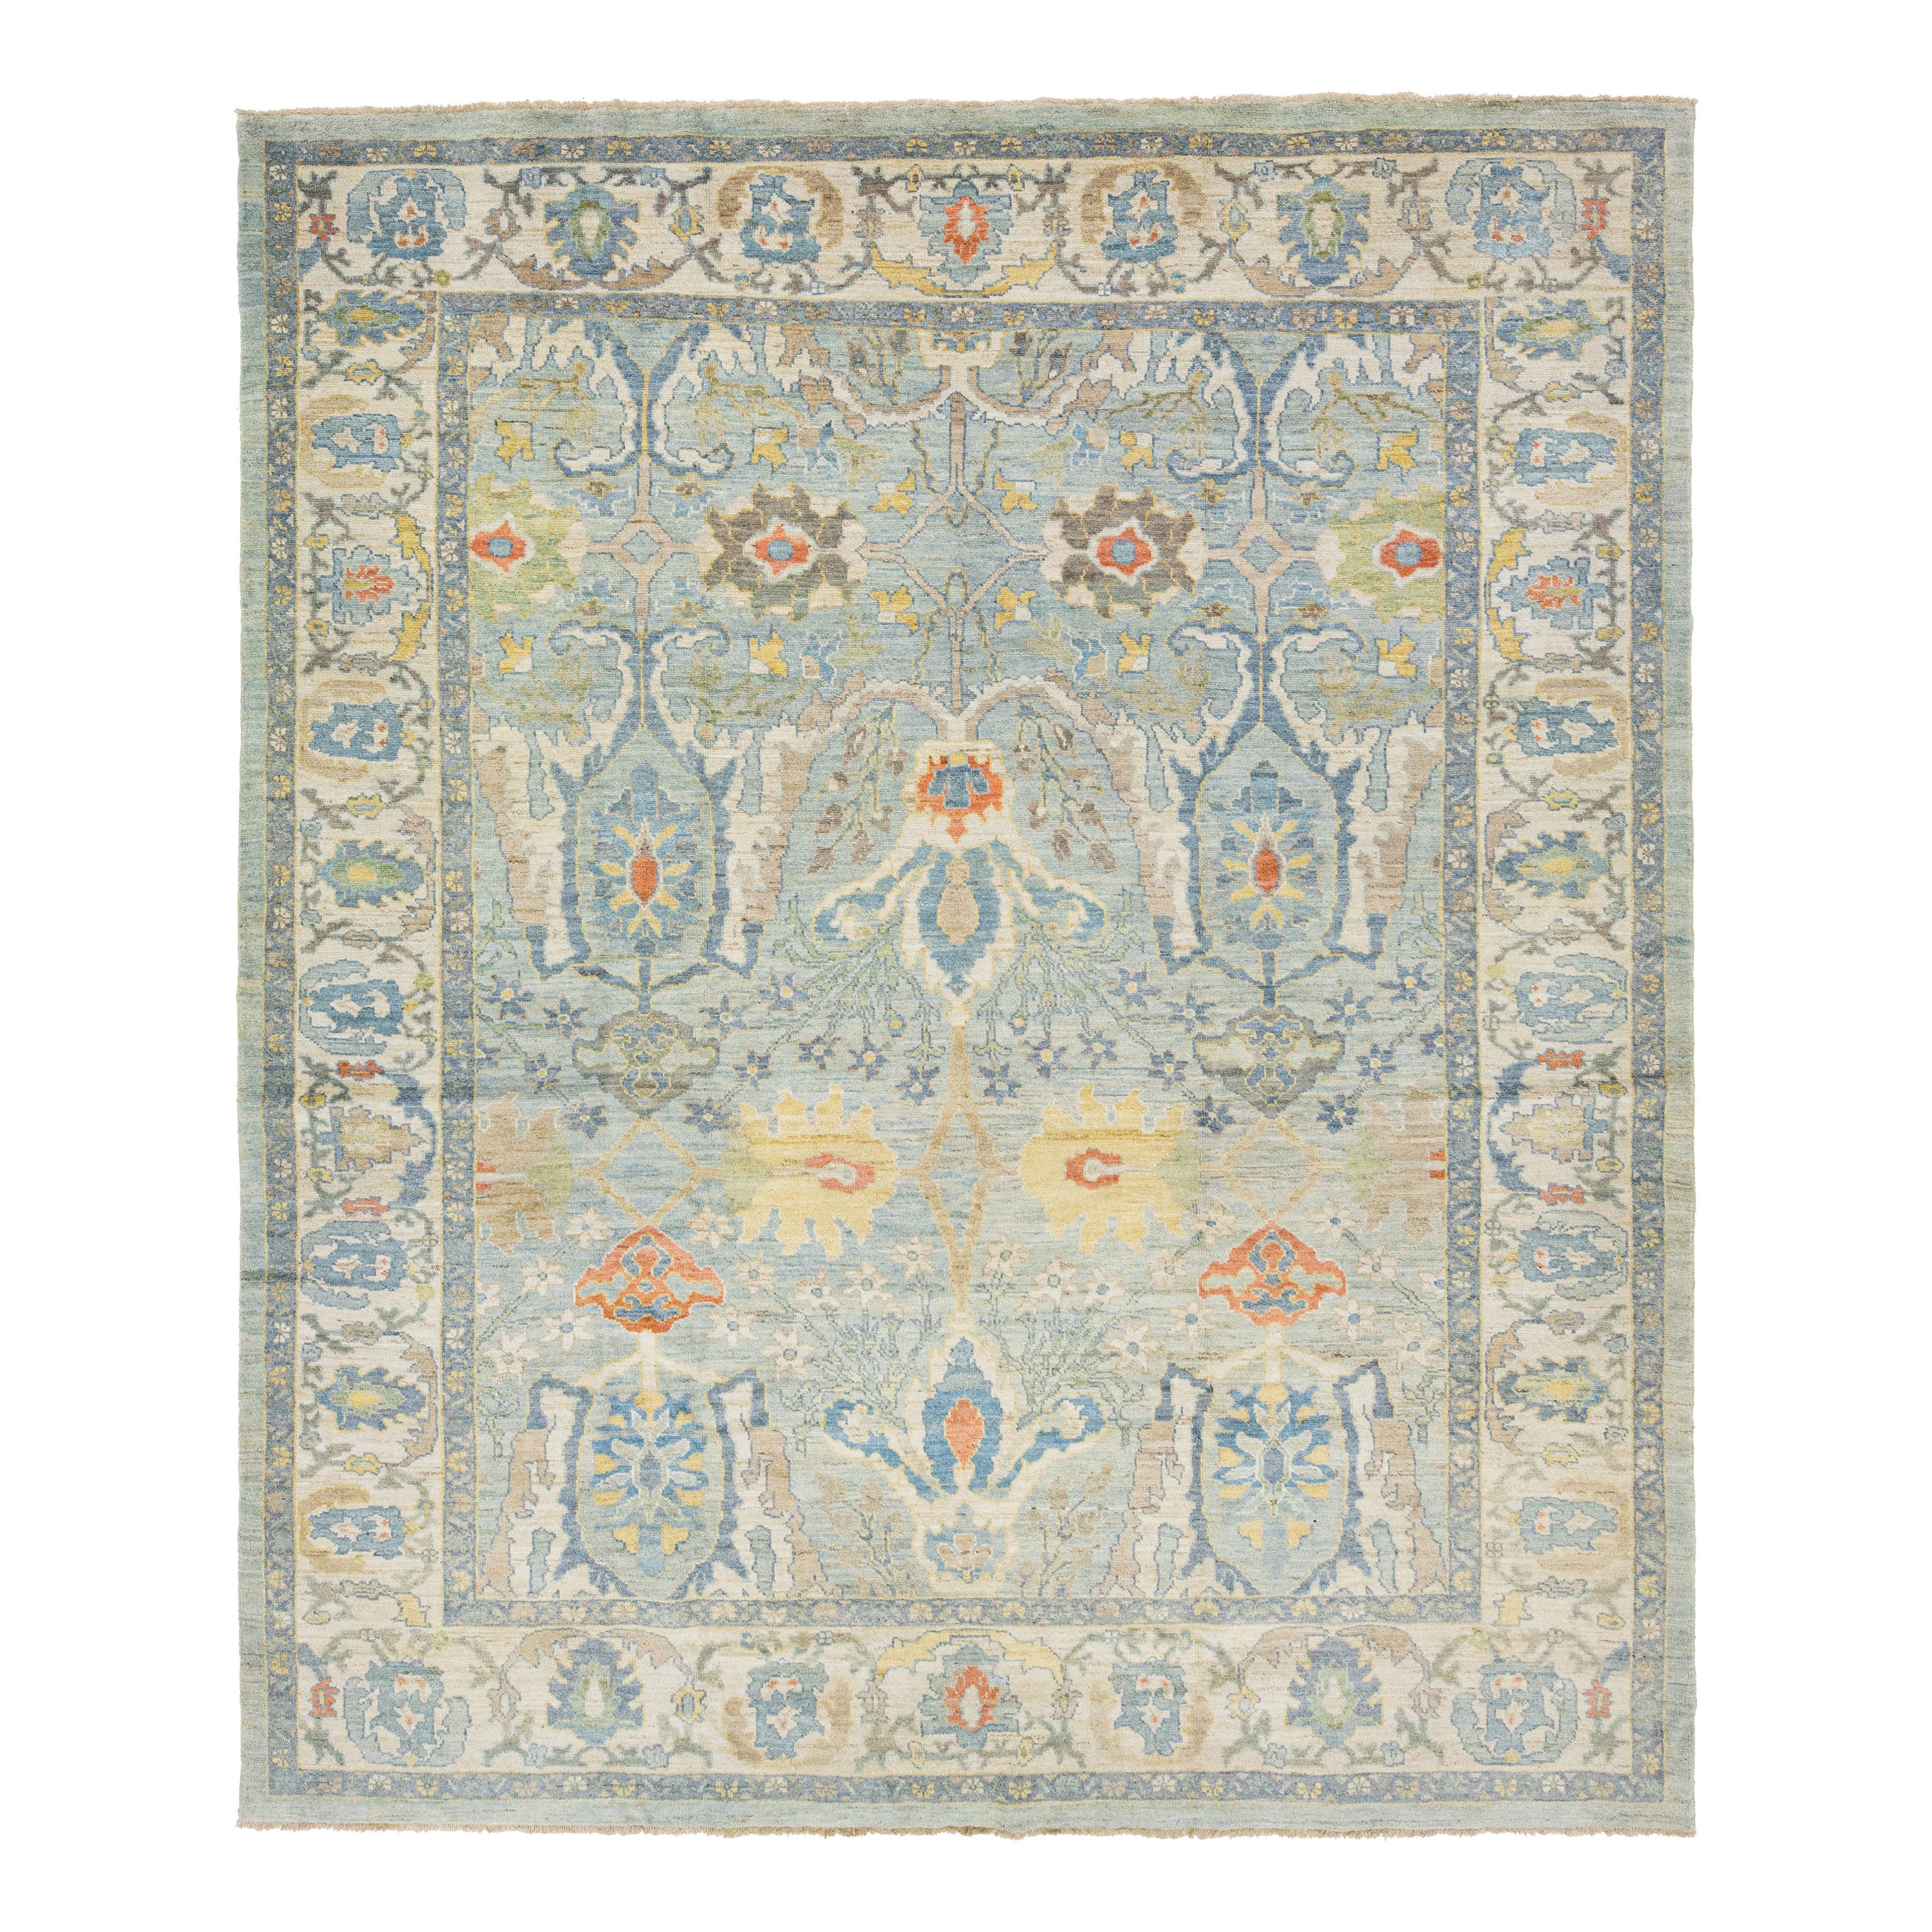 Contemporary Light Blue Sultanabad Wool Rug Handmade with Floral Pattern